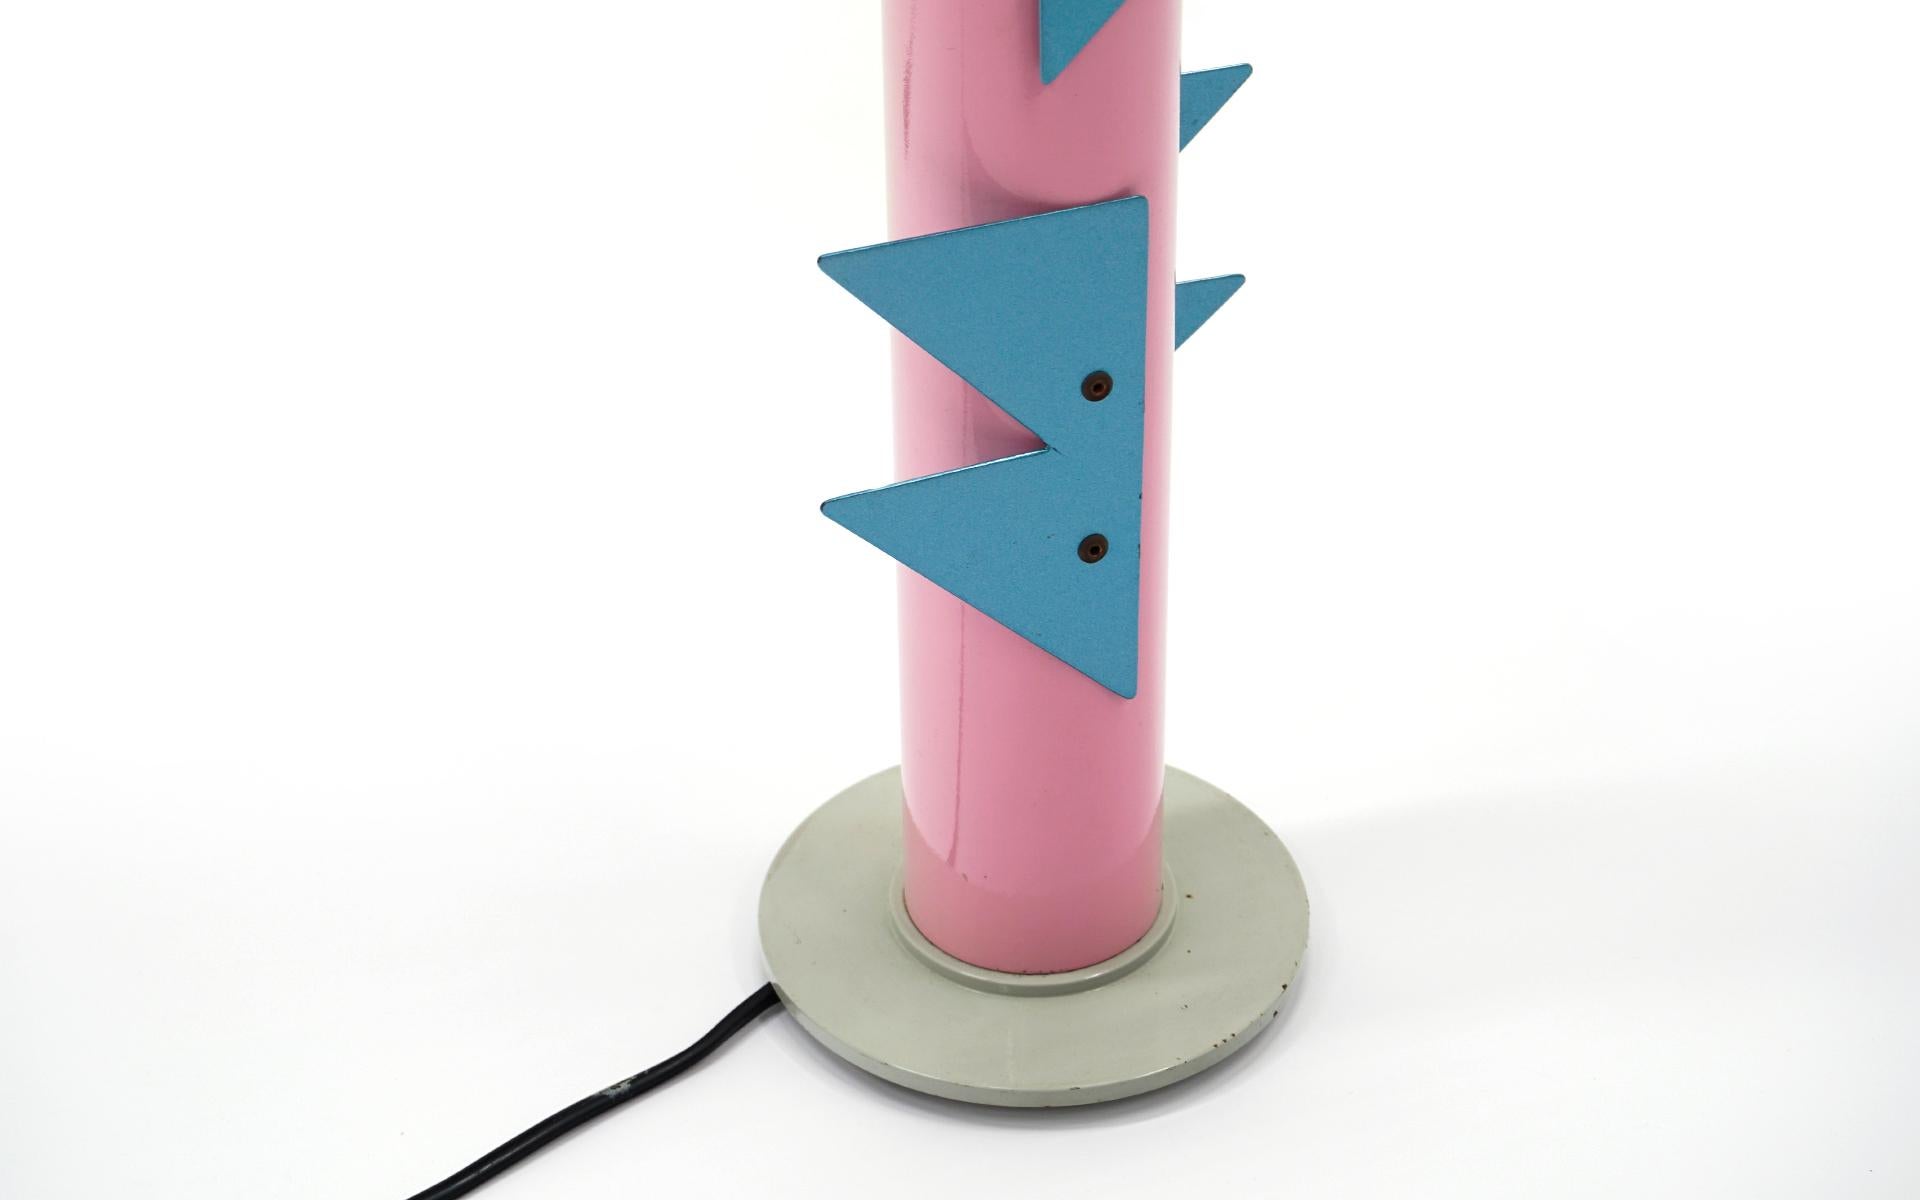 Table Lamp by Alessandro Mendini for Studio Alchimia, Italy, 1980s, Pink & Blue In Good Condition For Sale In Kansas City, MO